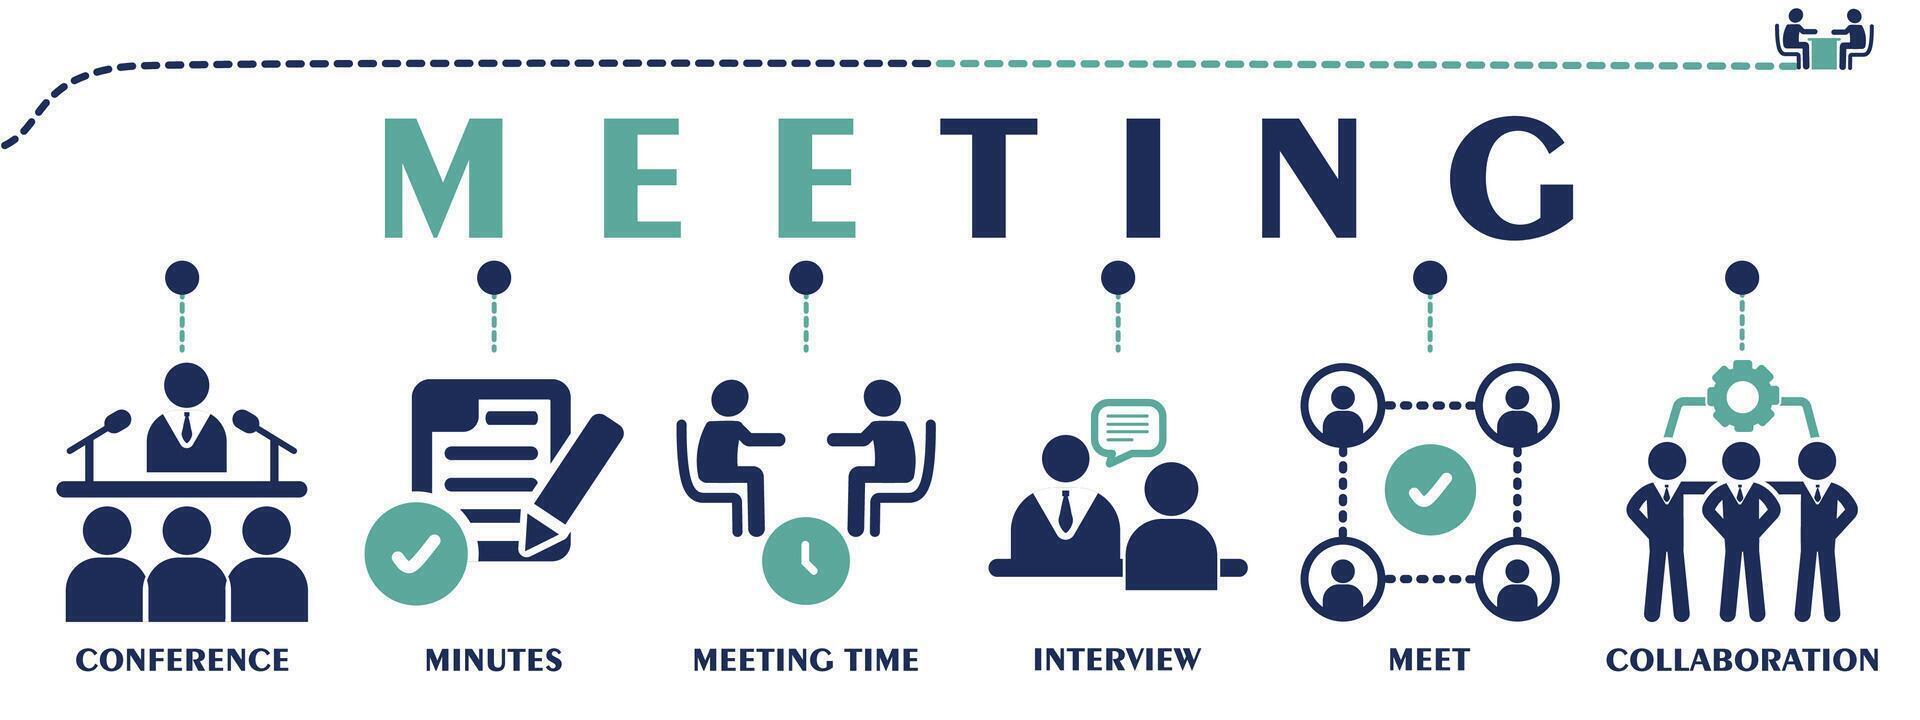 Meeting banner web solid icons. Vector illustration concept with an icon of conference, minutes, meeting time, interview, meet and collaboration